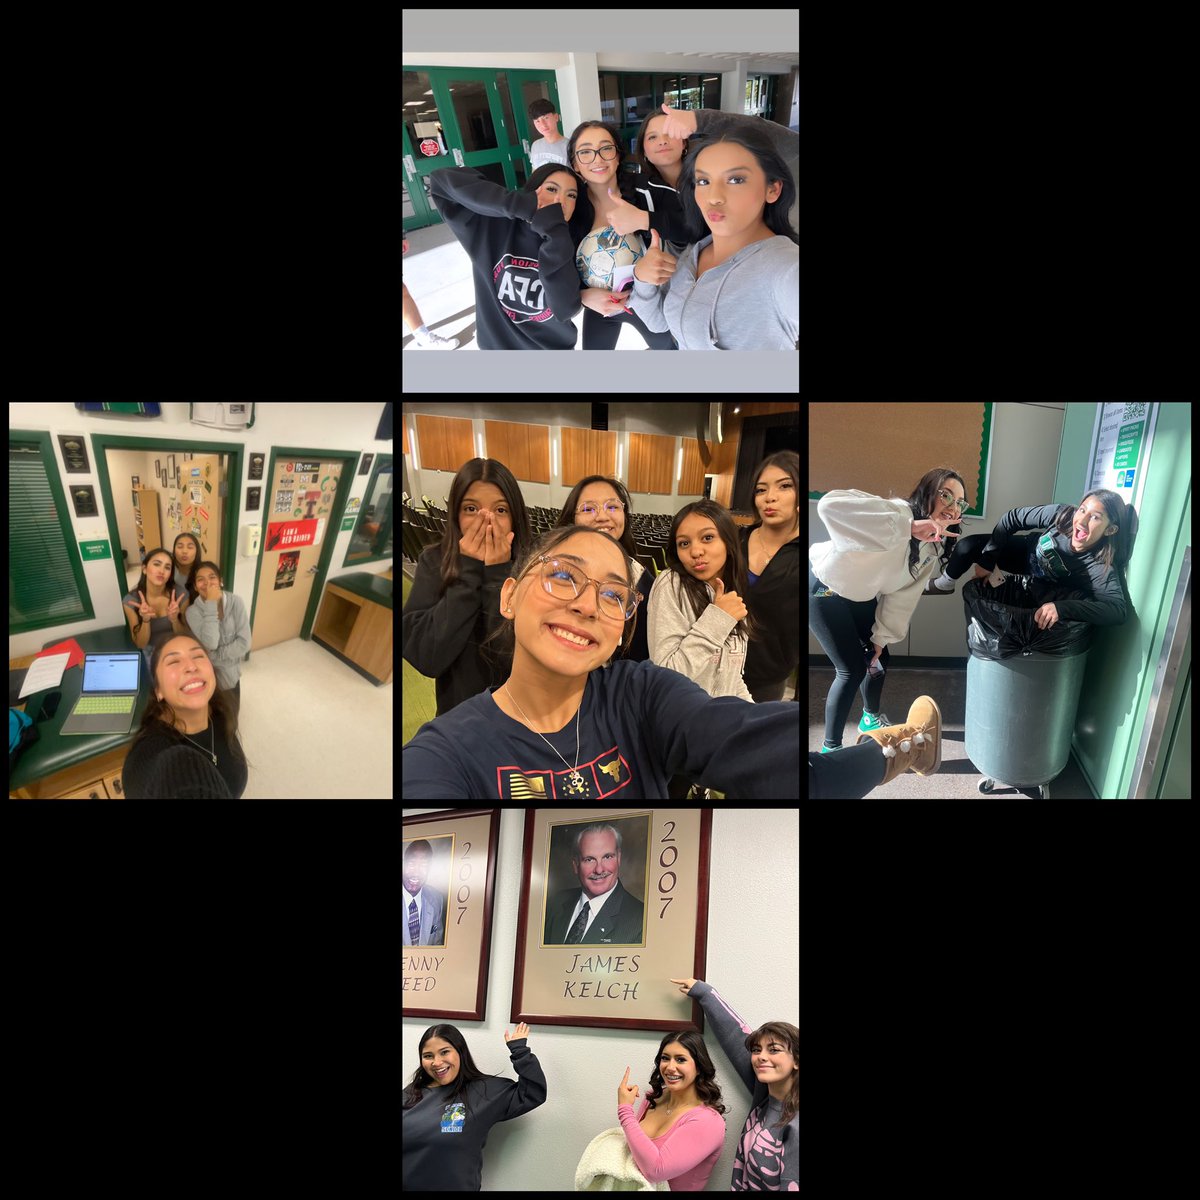 @MontwoodHSCheer having fun participating in a campus scavenger hunt! @MontwoodHS